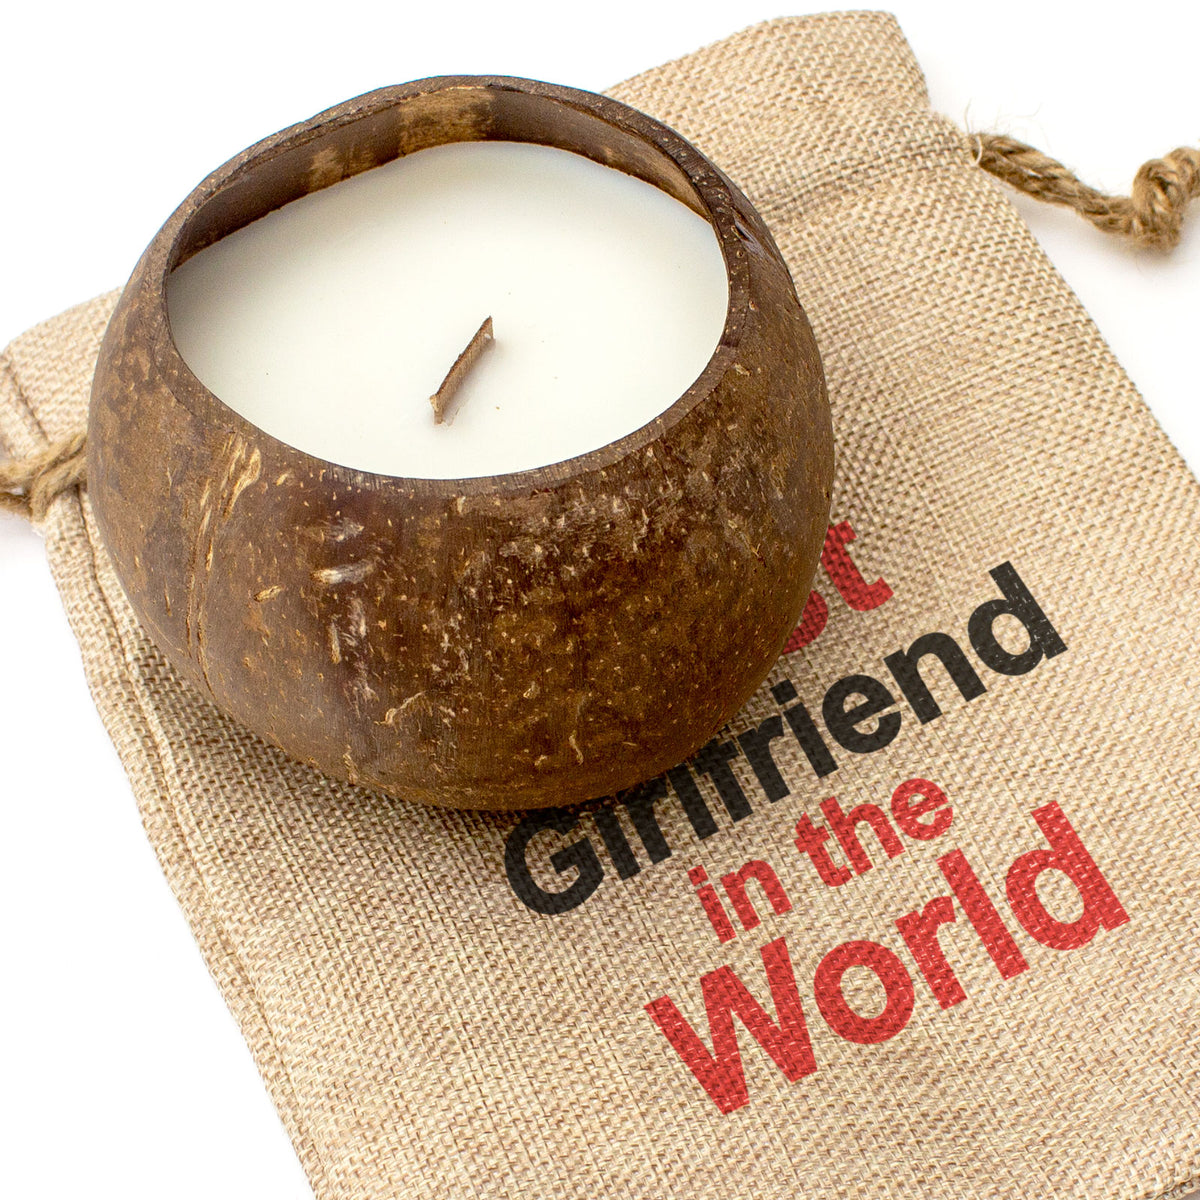 BEST GIRLFRIEND IN THE WORLD - Toasted Coconut Bowl Candle – Soy Wax - Gift Present